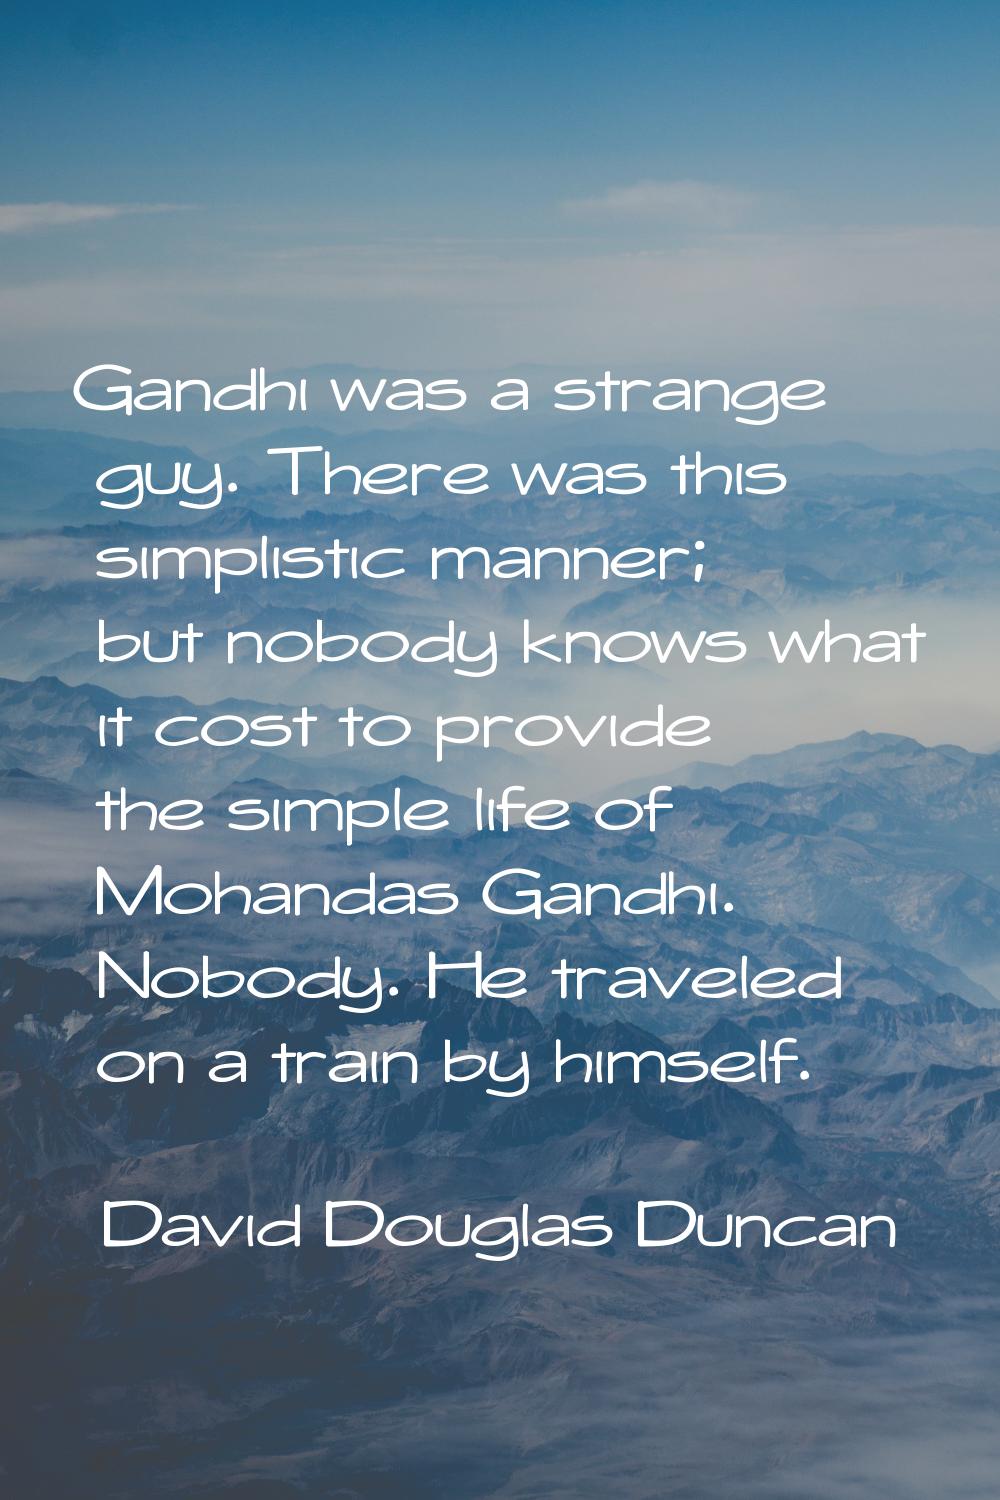 Gandhi was a strange guy. There was this simplistic manner; but nobody knows what it cost to provid